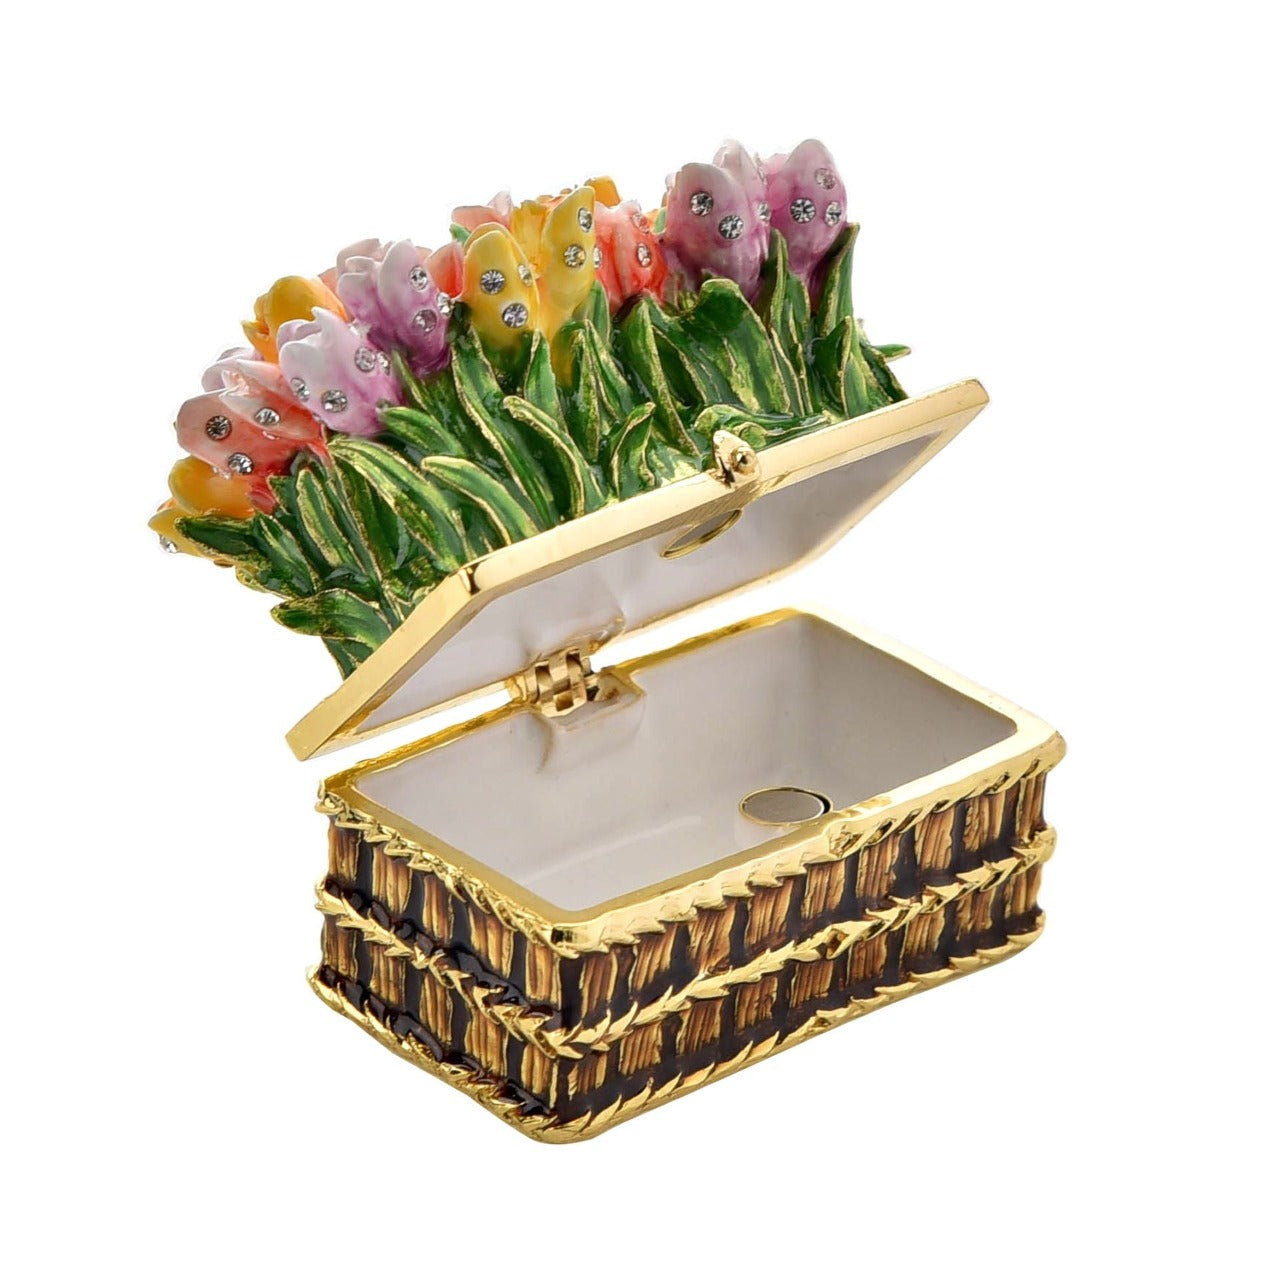 Treasured Trinkets - Flower Box  A flower box trinket box from Treasured Trinkets by STRATTON.  The wondrous trinket box makes a true statement piece for any bedroom, with flowery decoration which is truly in full bloom.